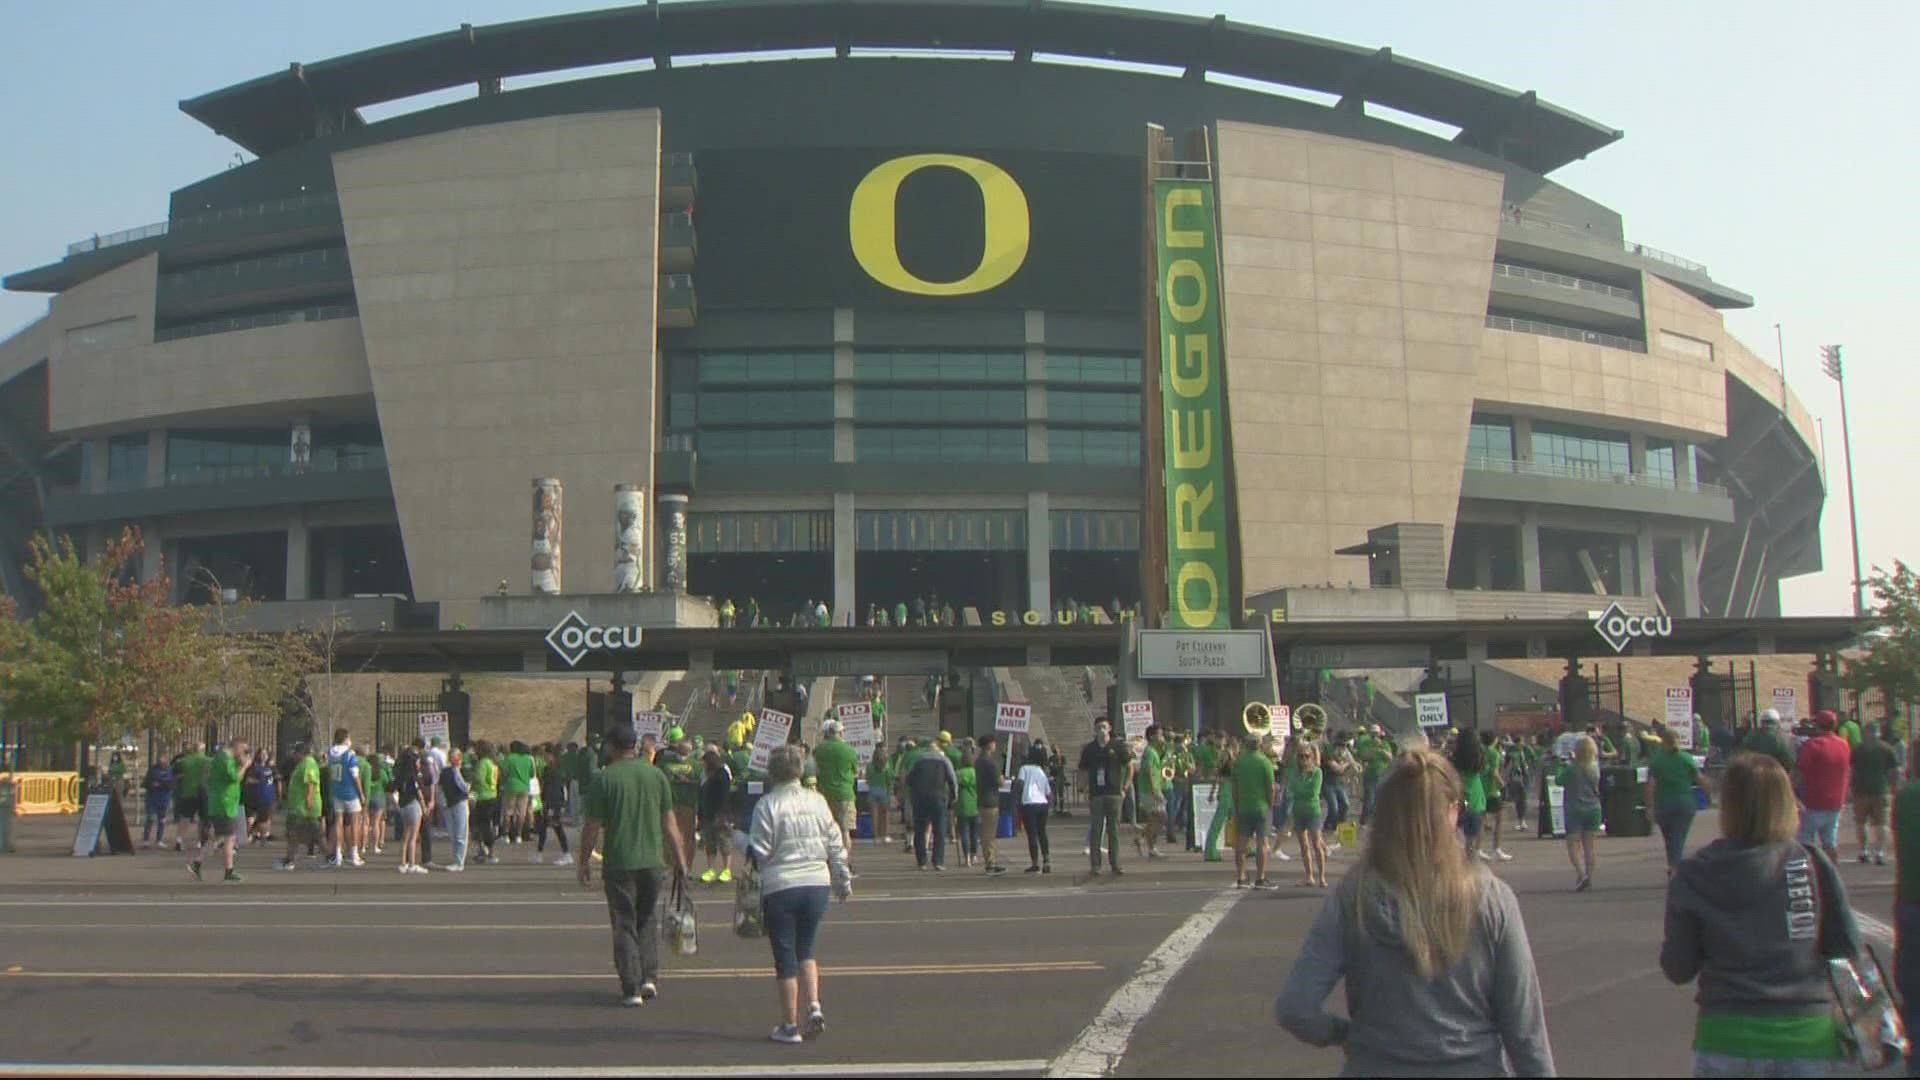 After 22 months, fans were welcomed back to Autzen Stadium to watch the Ducks take on Fresno State. They had to show proof of vaccination or a negative COVID test.